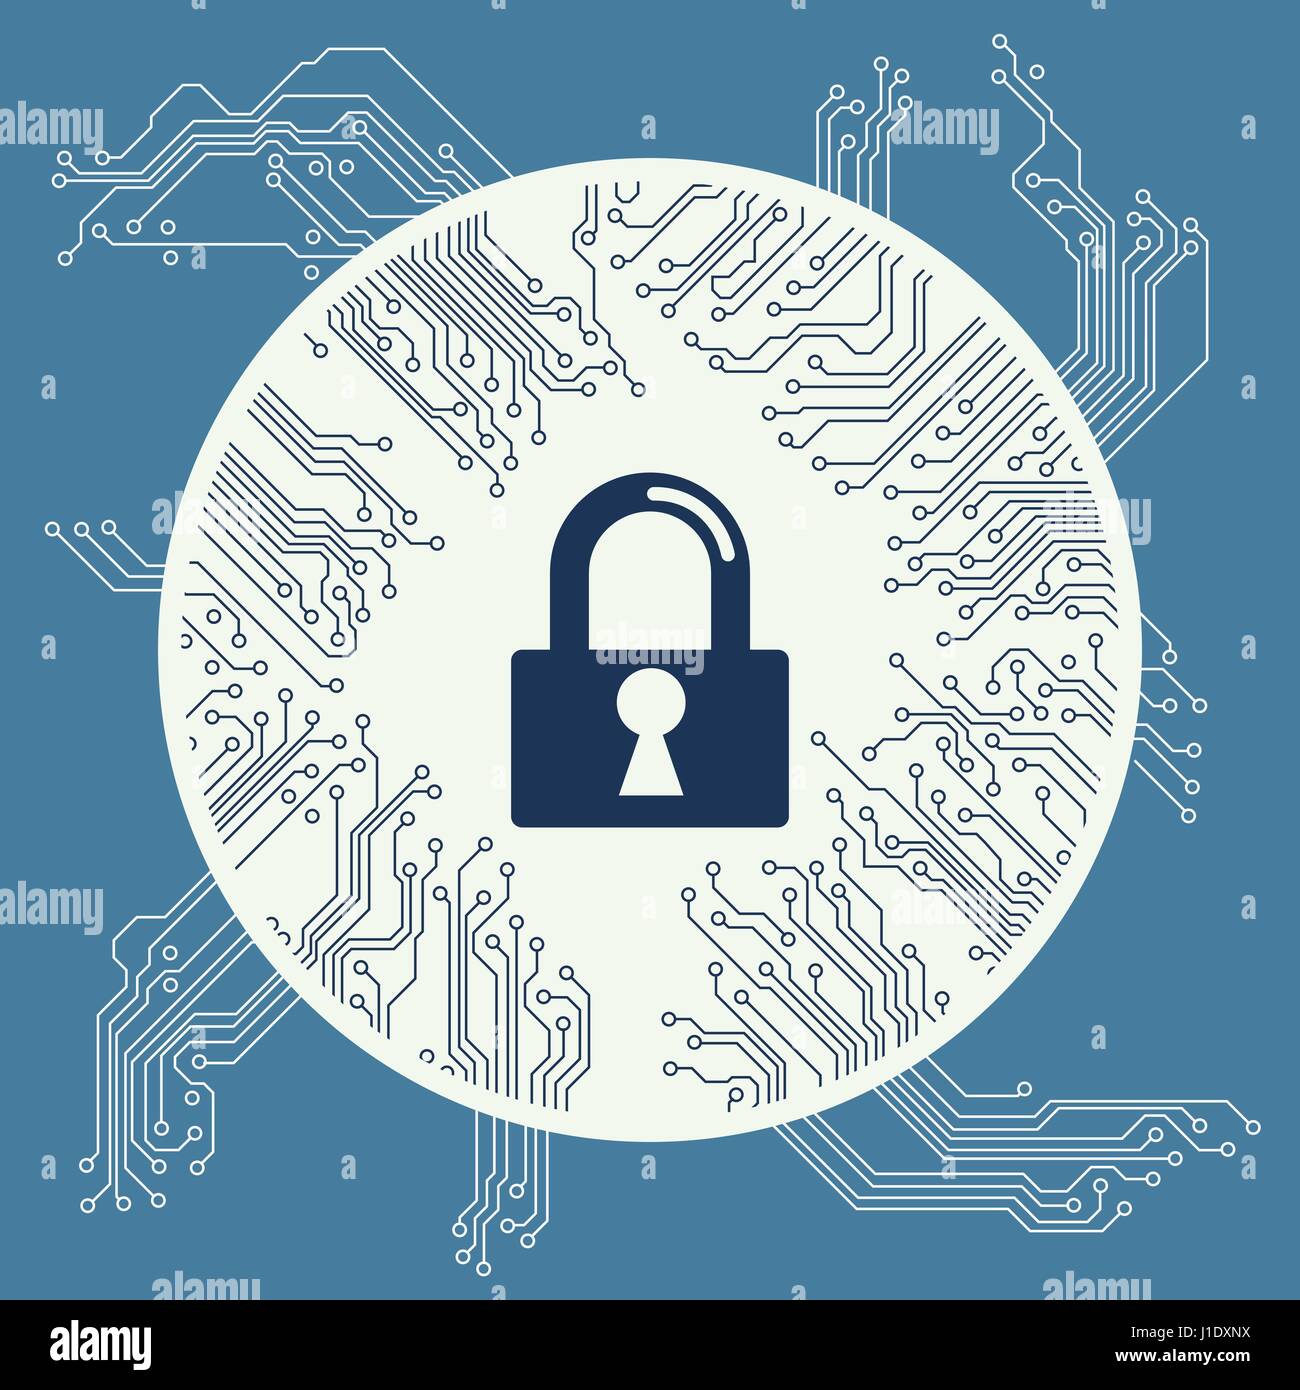 Cyber security design vector illustration graphic Stock Vector